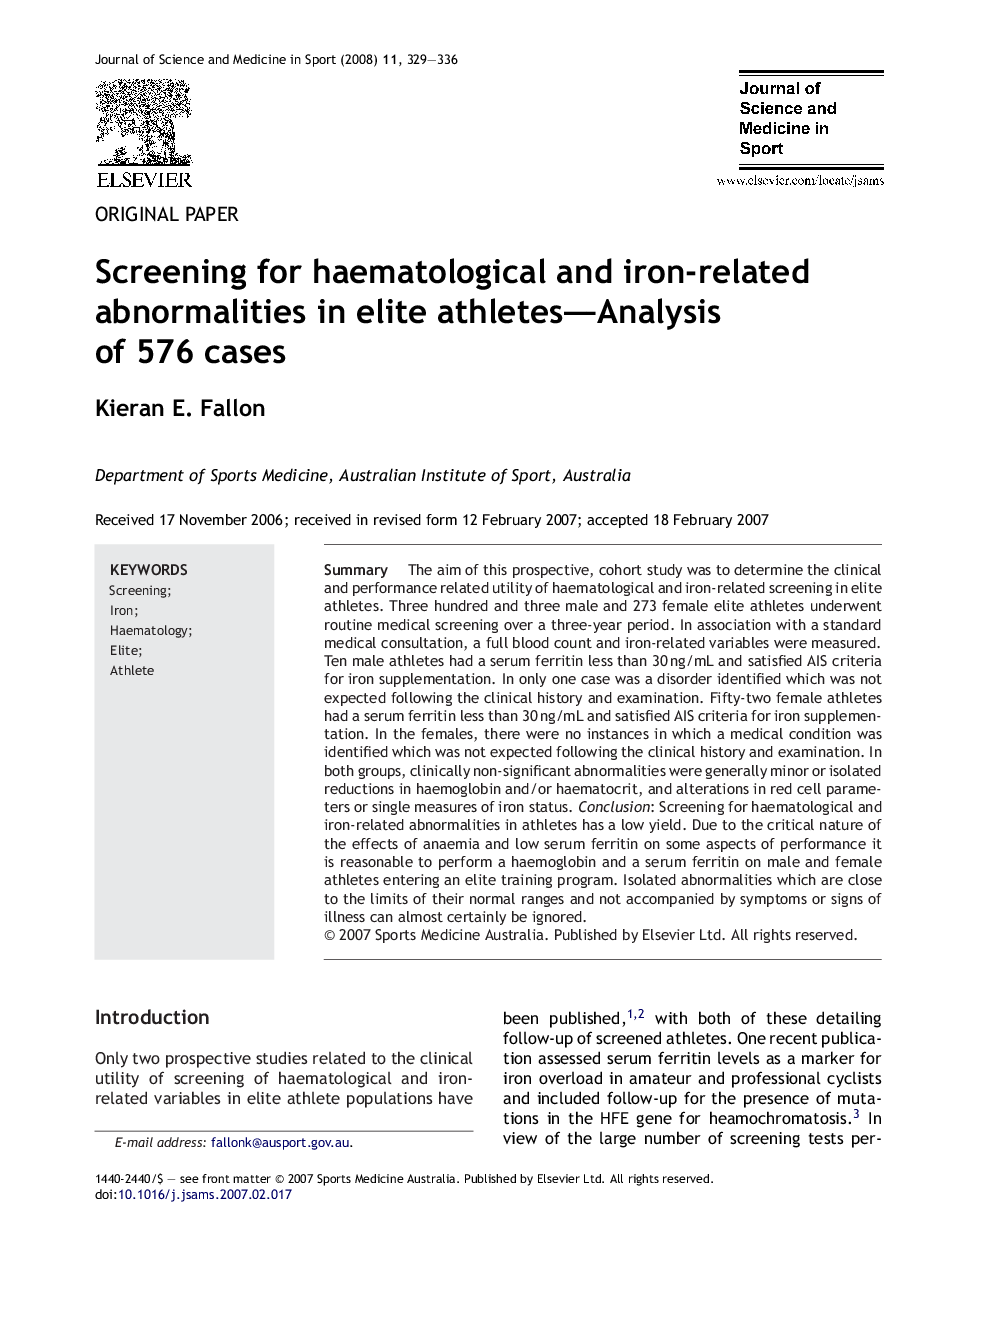 Screening for haematological and iron-related abnormalities in elite athletes—Analysis of 576 cases